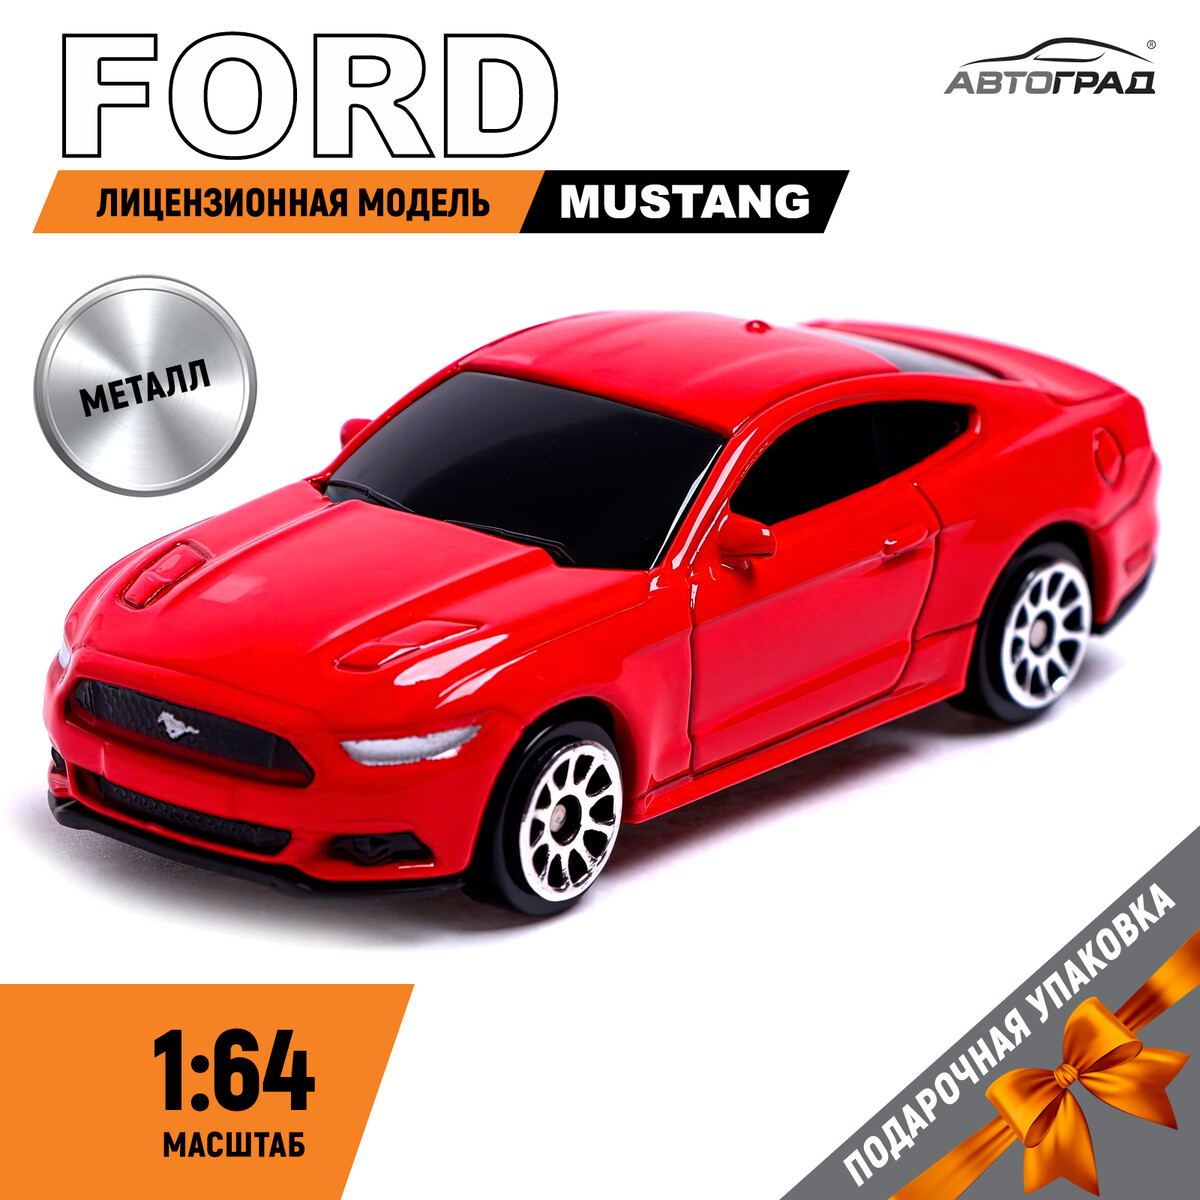 Машина металлическая ford mustang, 1:64, цвет красный xnrkey 3 buttons remote car key for ford mondeo 2 0t kuga mustang edge 434mhz id49chip ds7t 15k601 d